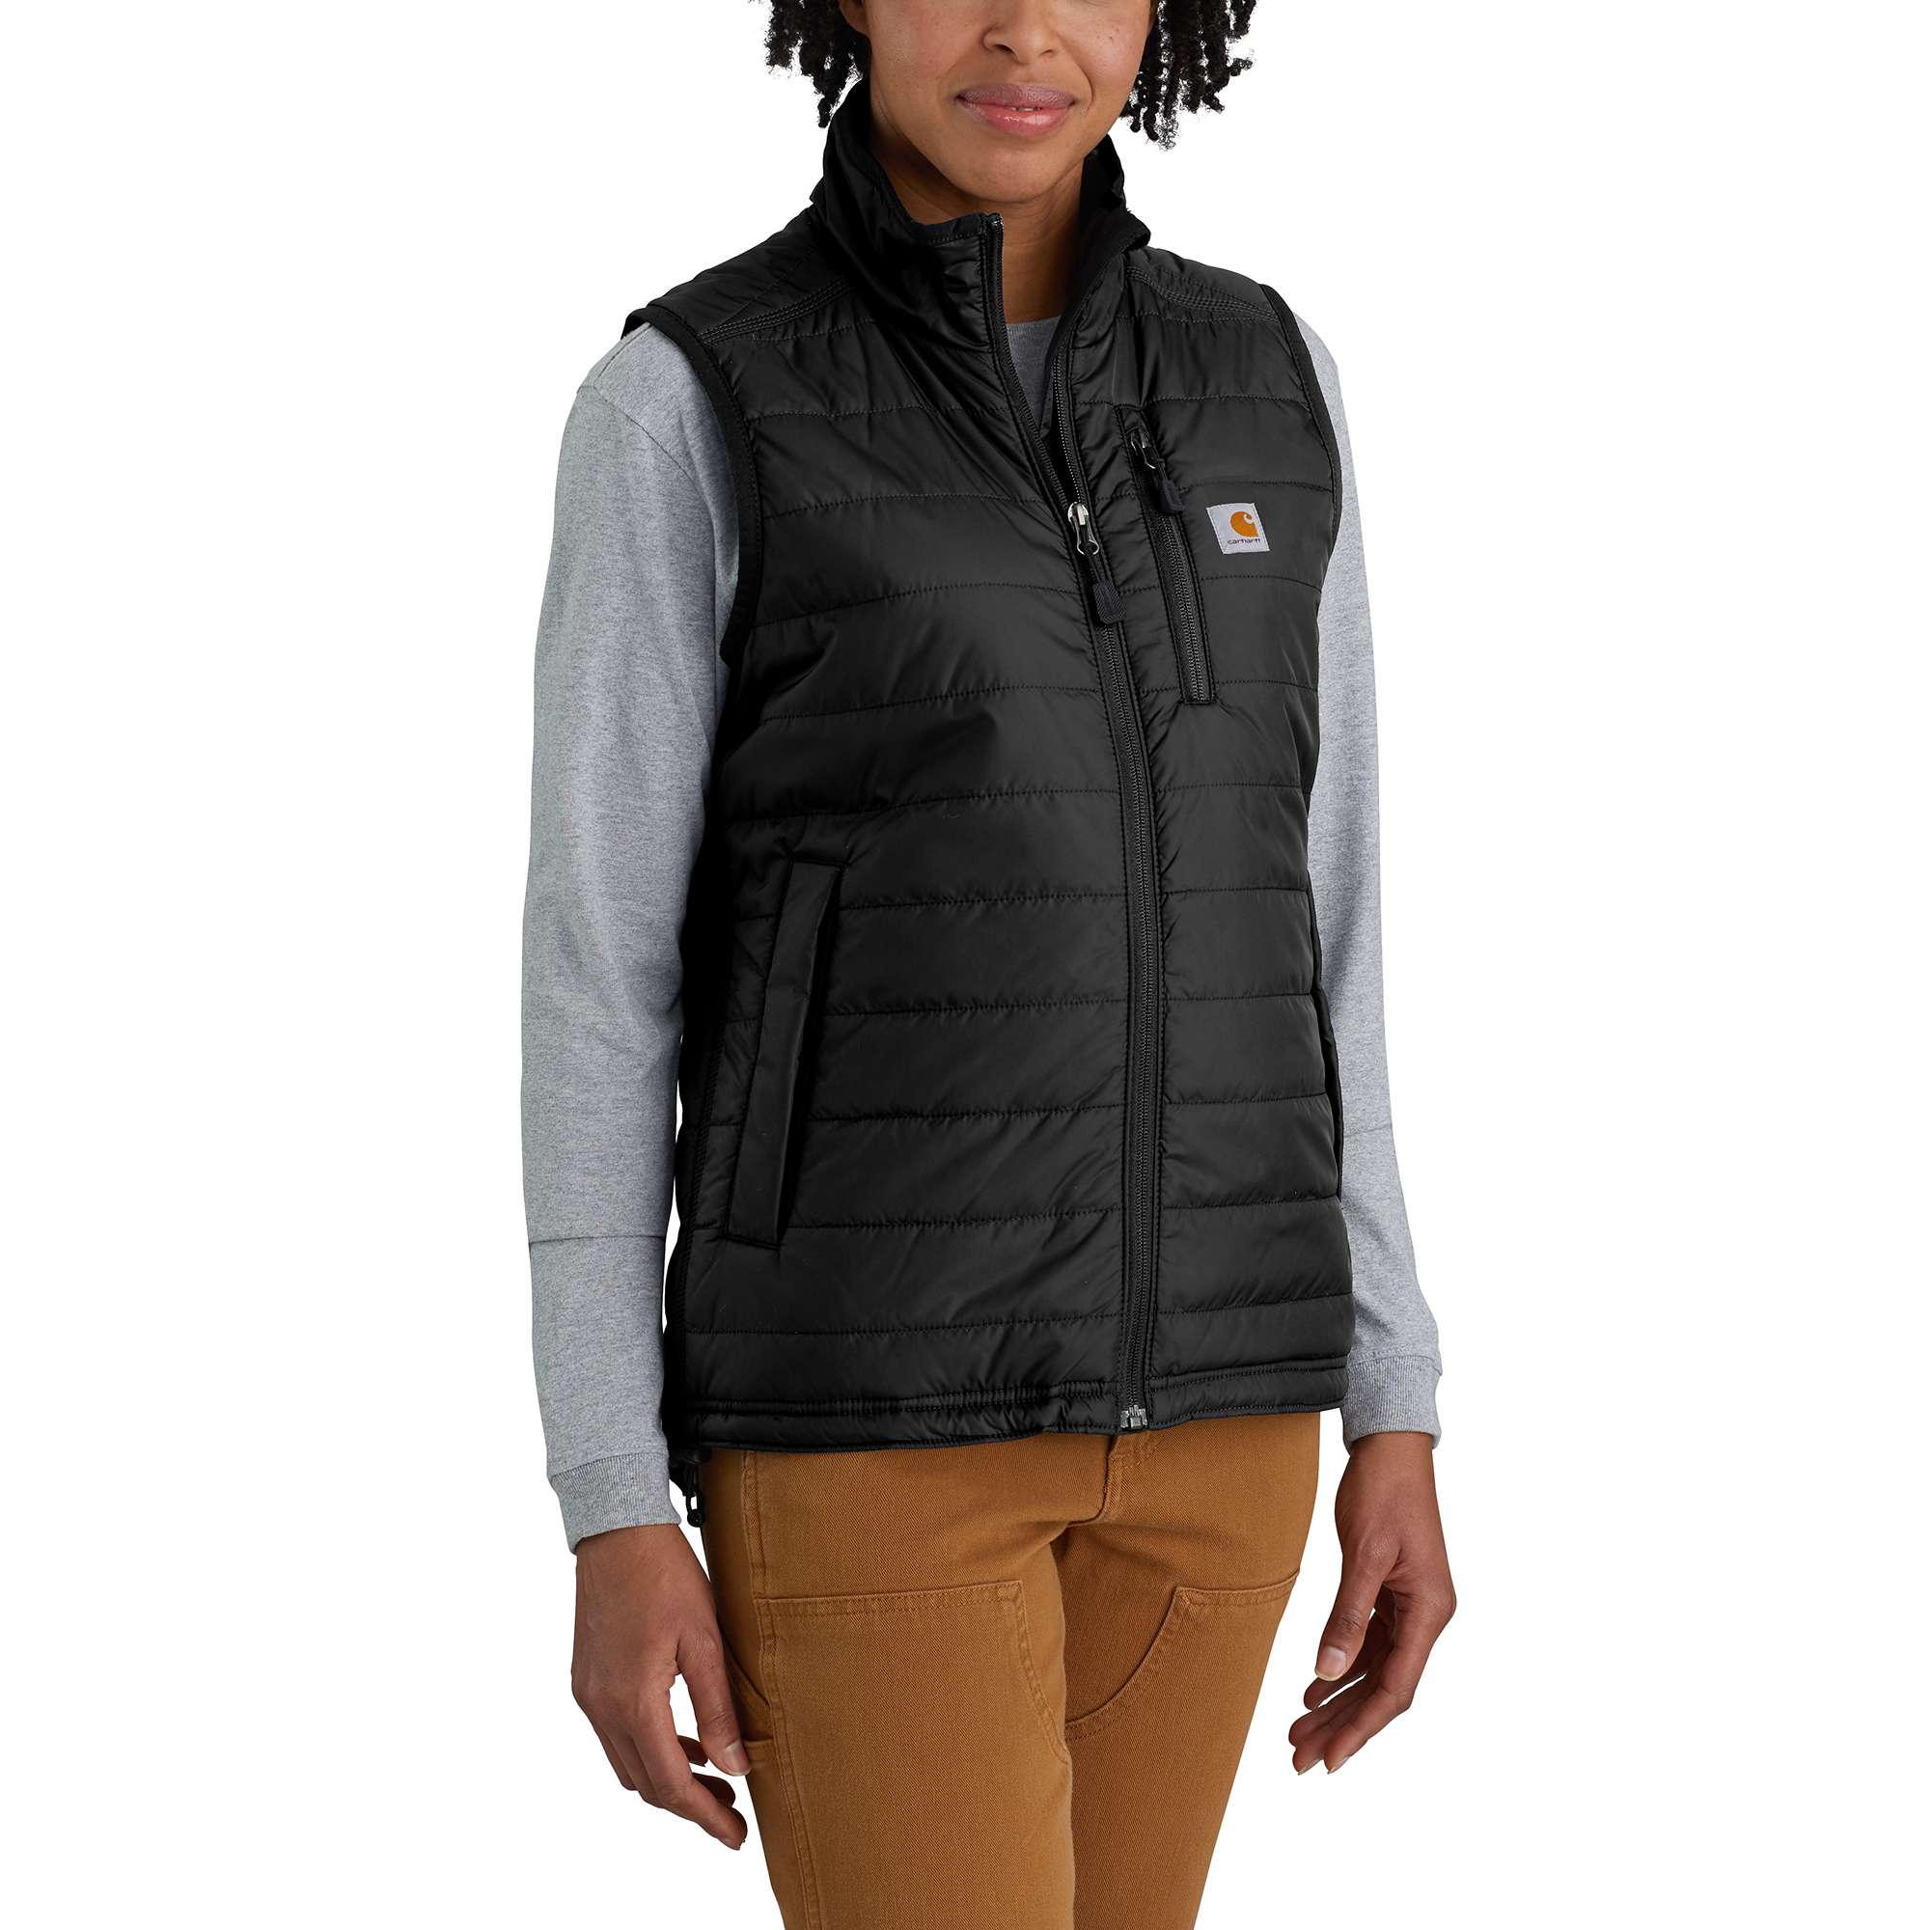 CARHARTT 105607 - Women's Montana Relaxed Fit Insulated Vest - Black